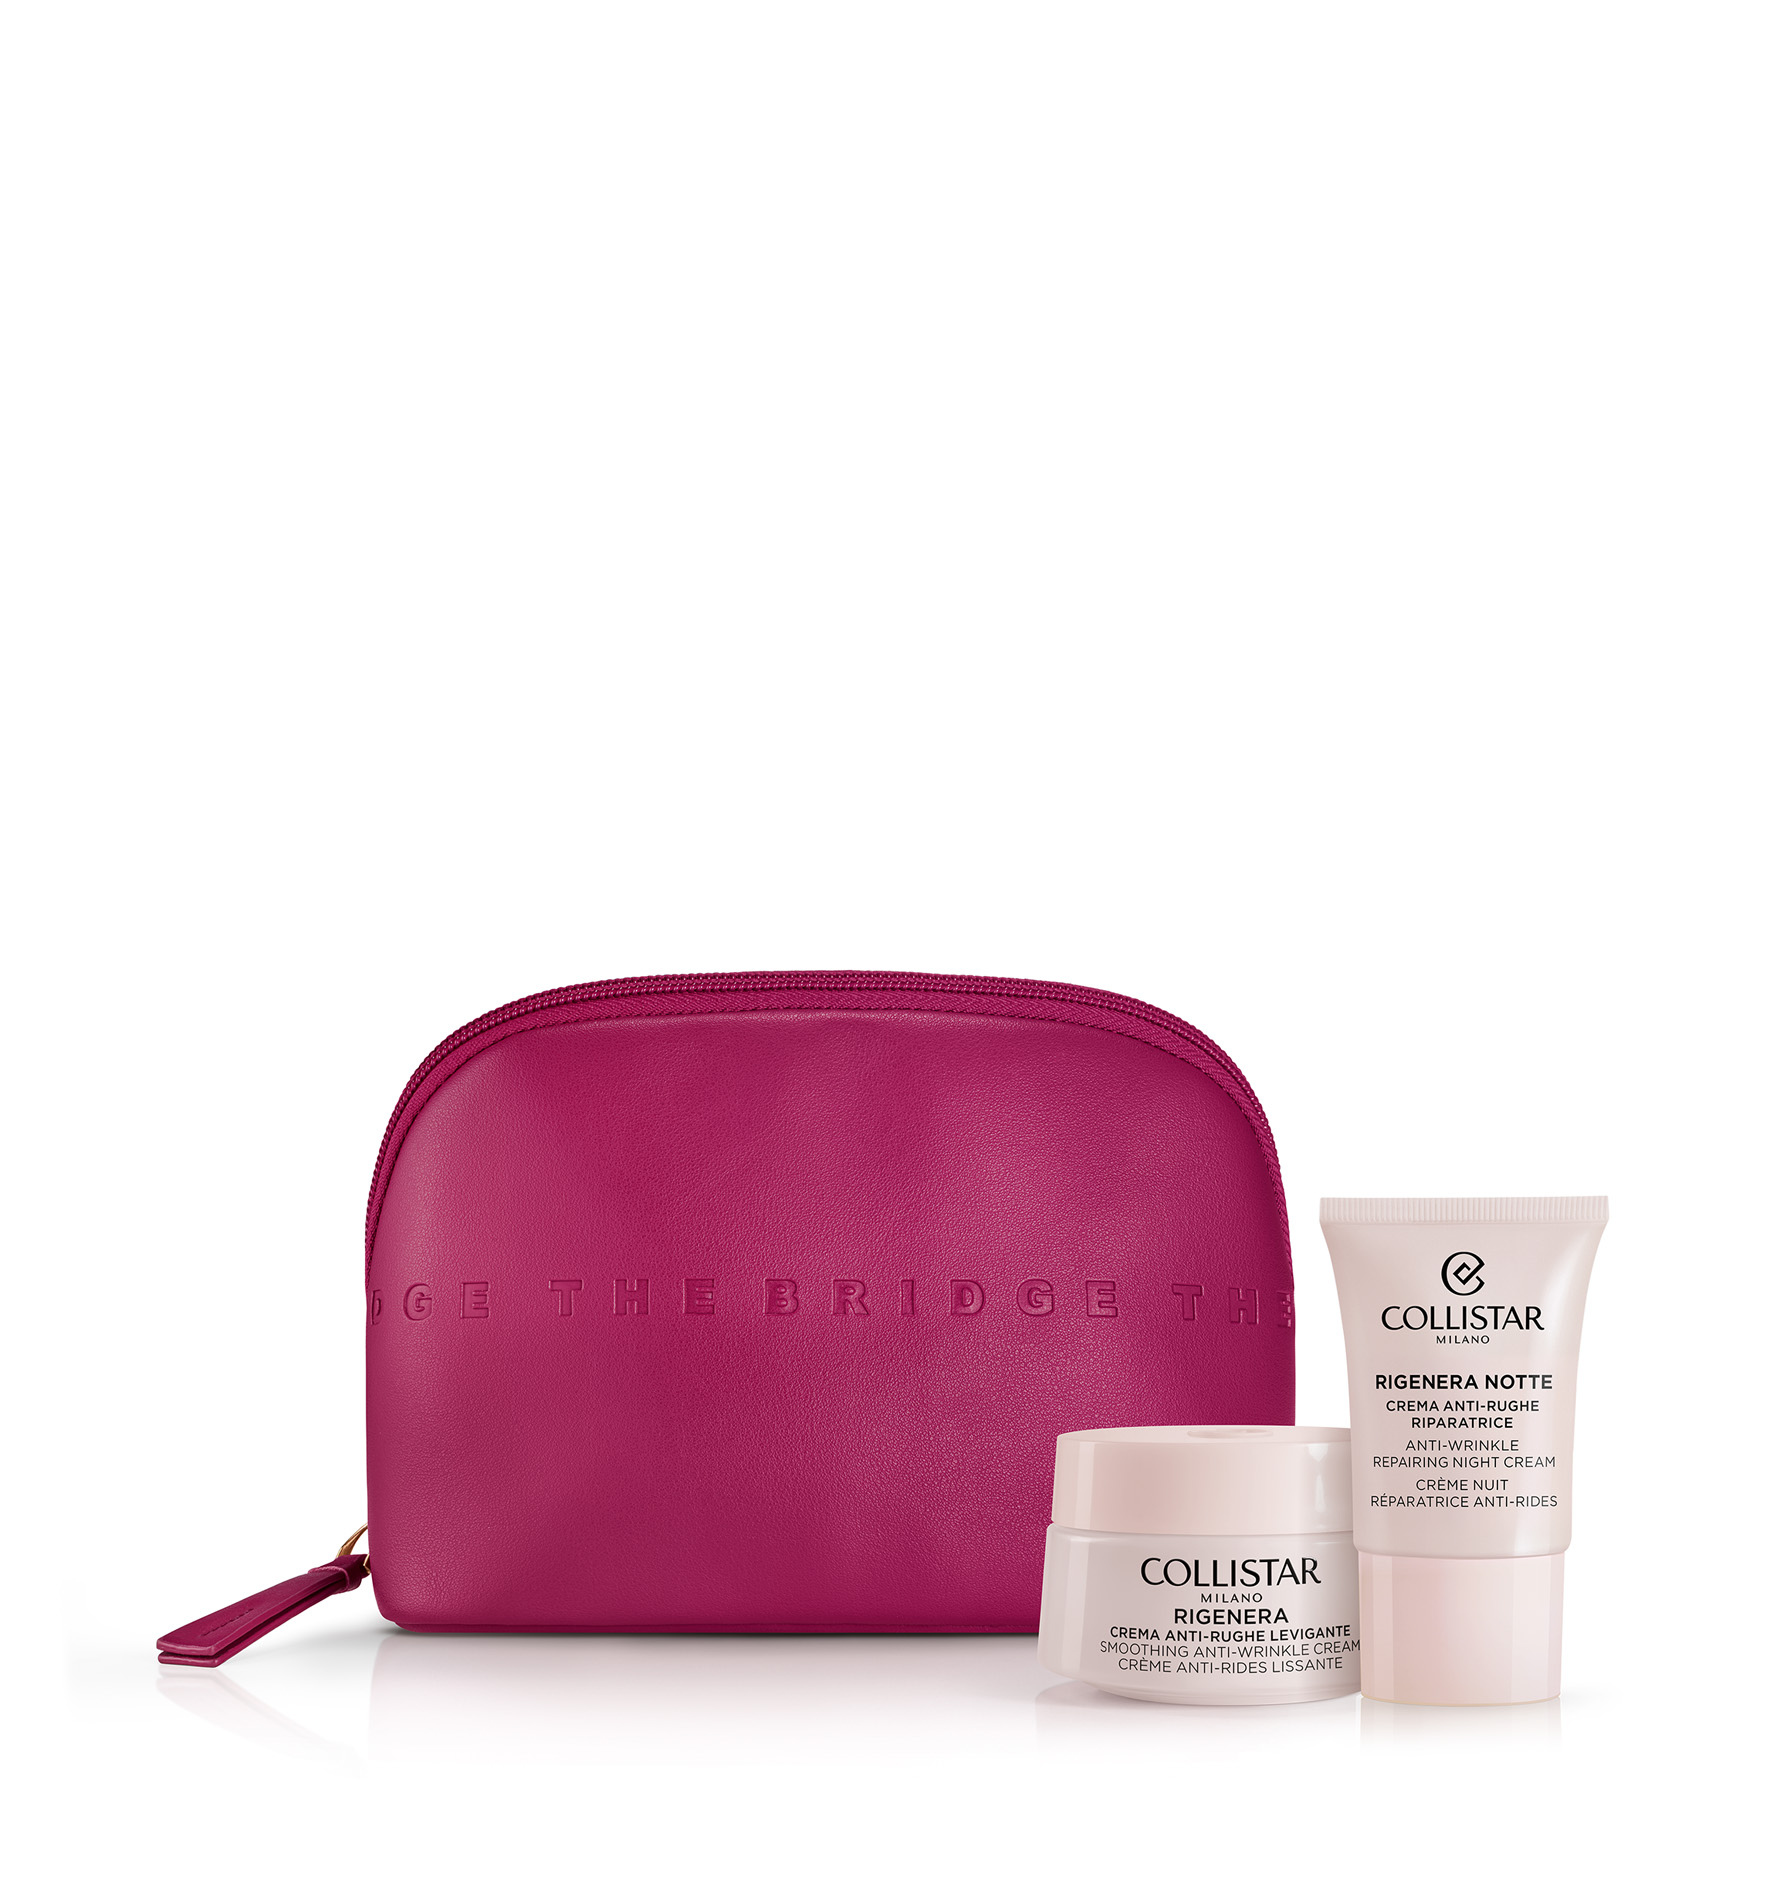 RIGENERA SMOOTHING ANTI-WRINKLE CREAM FACE AND NECK GIFT SET - VALENTIJN | Collistar - Shop Online Ufficiale